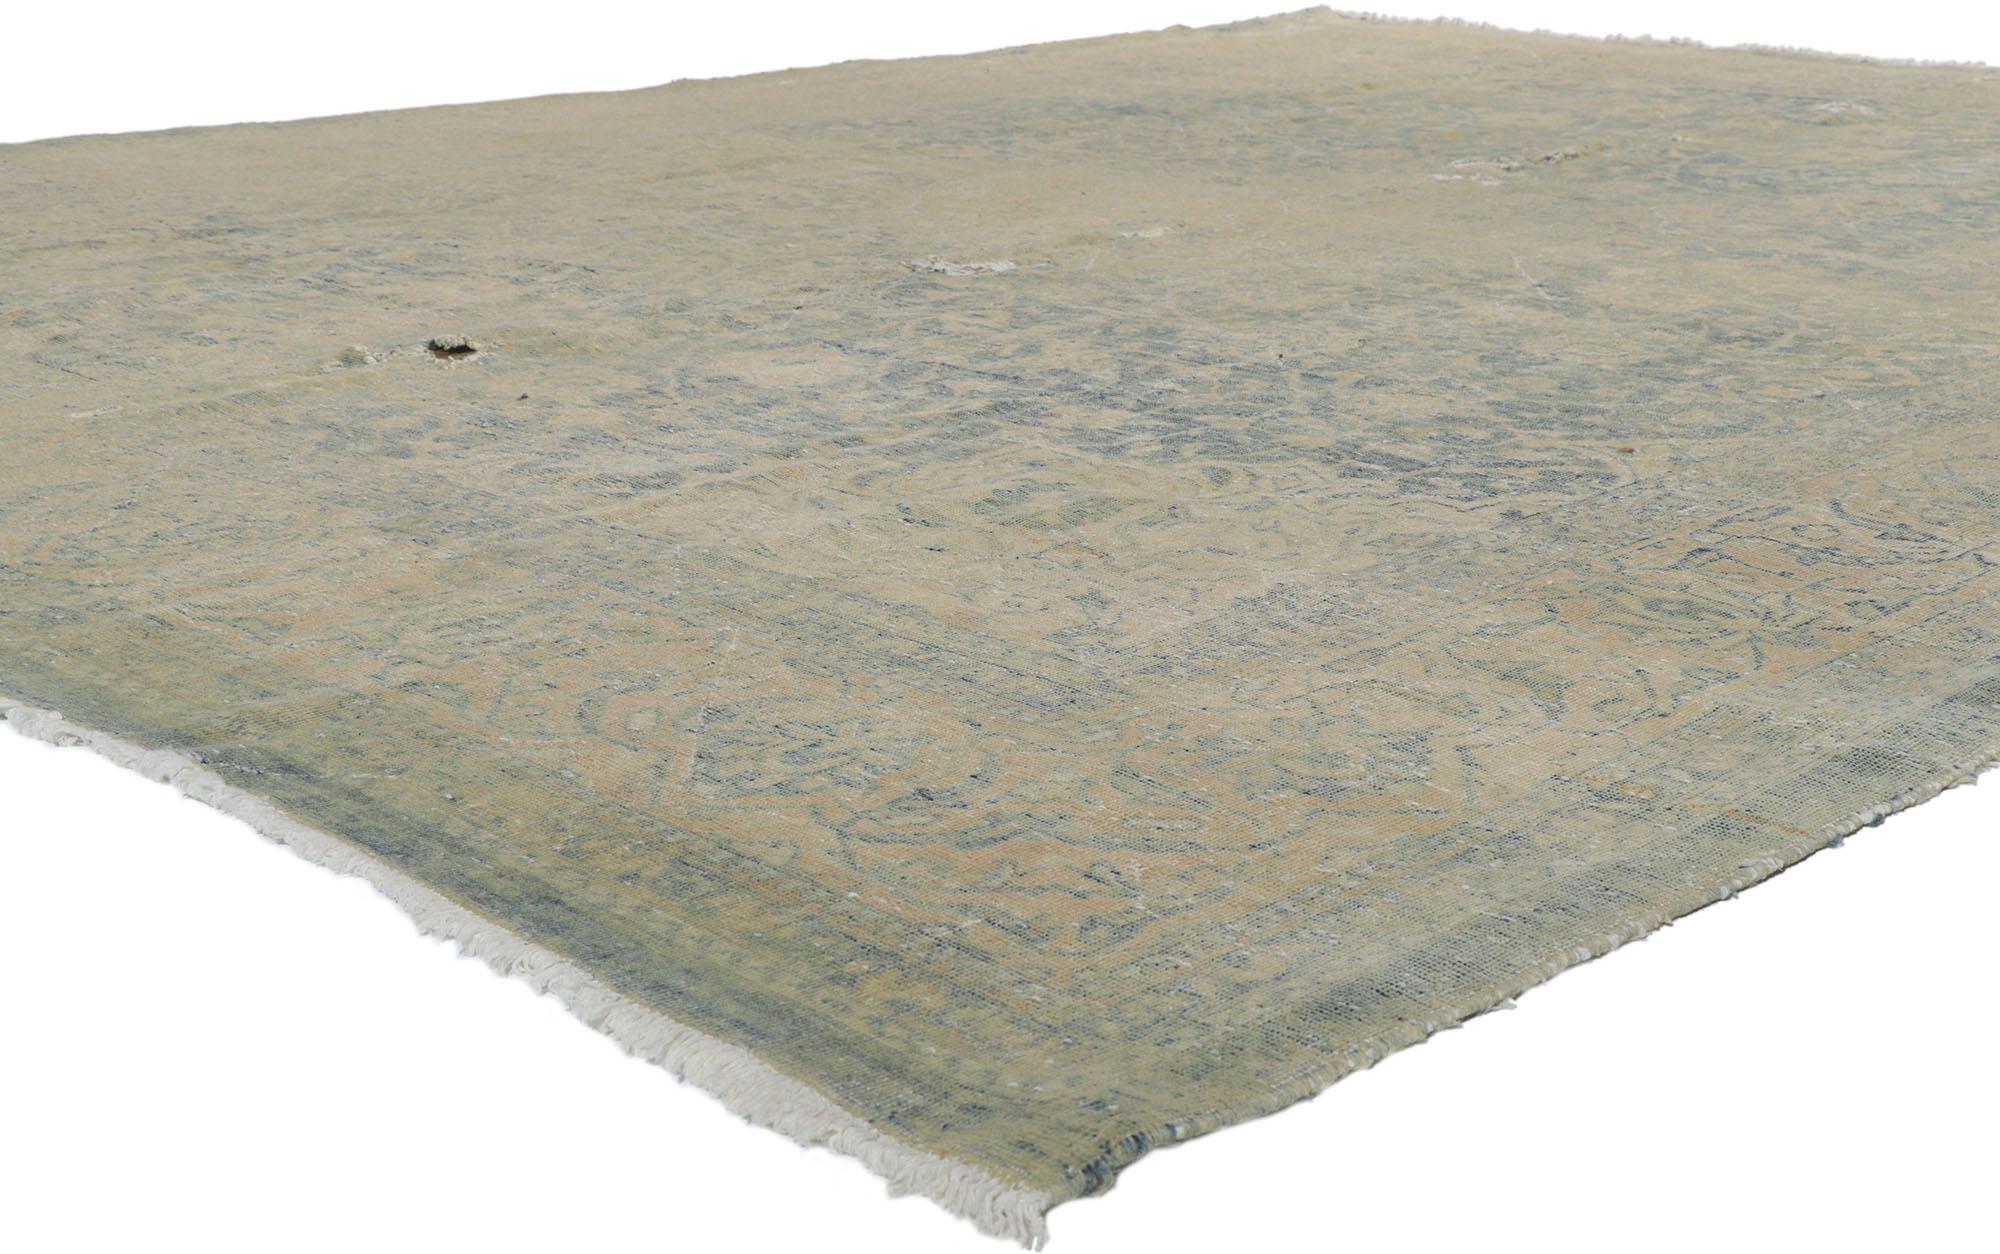 78196 Distressed Antique Persian Tabriz rug, 10'04 x 13'08. Desirable Age Wear. Antique Wash. Abrash. Hand-knotted wool. Made in Iran.